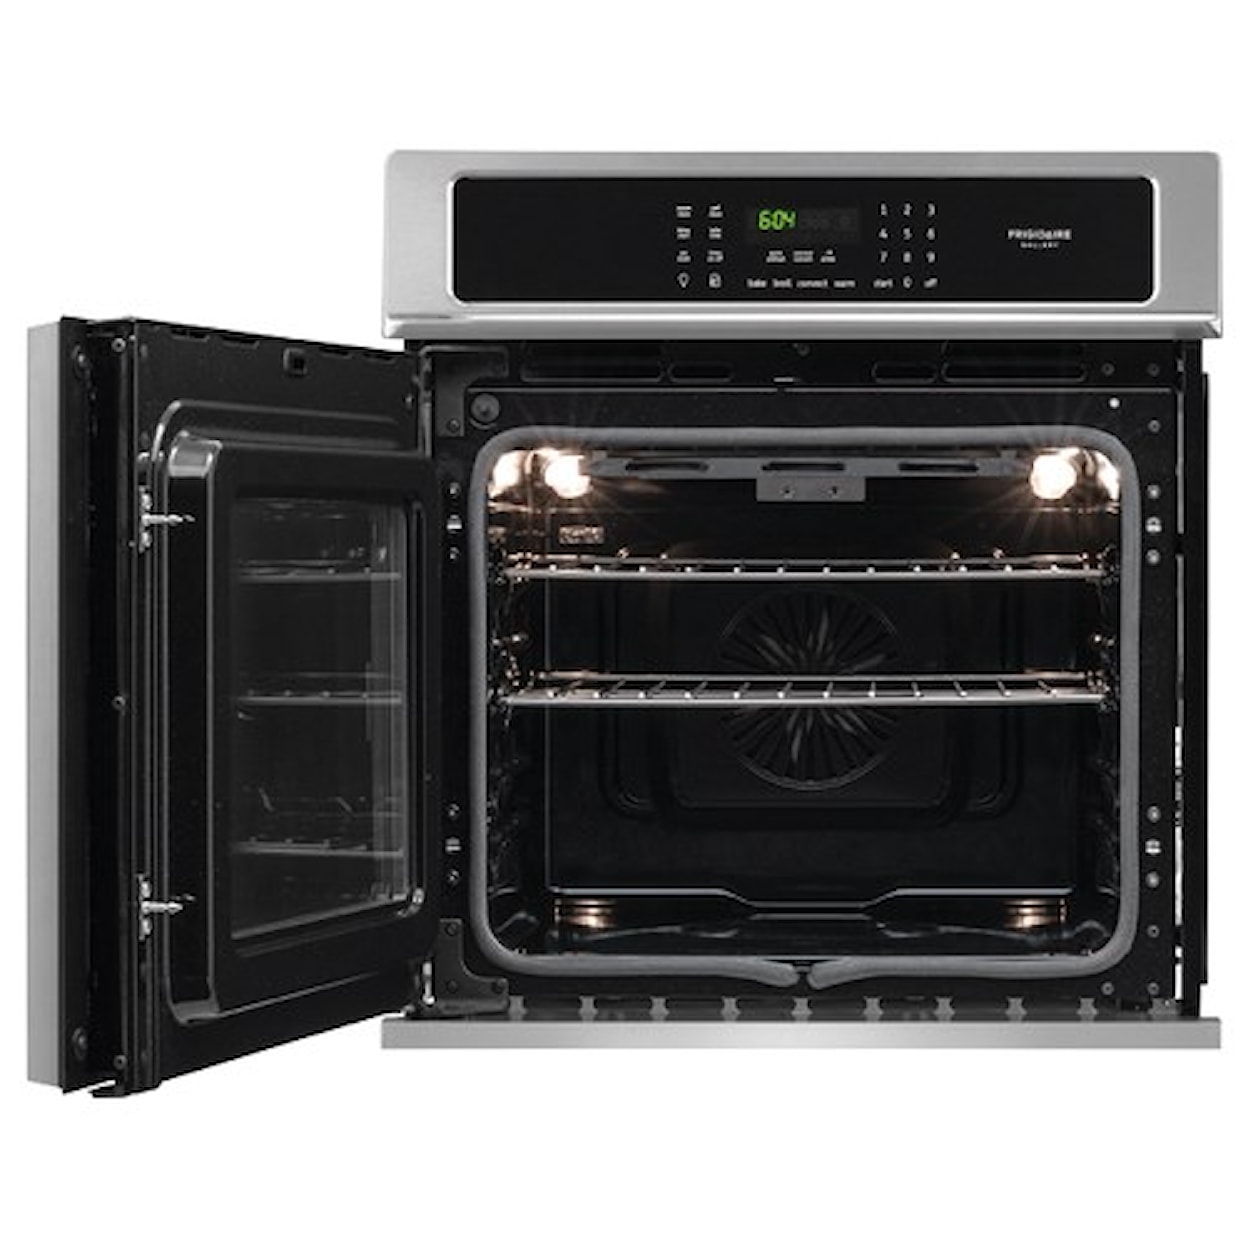 Frigidaire Frigidaire Gallery Ovens 27" Single Electric Wall Oven